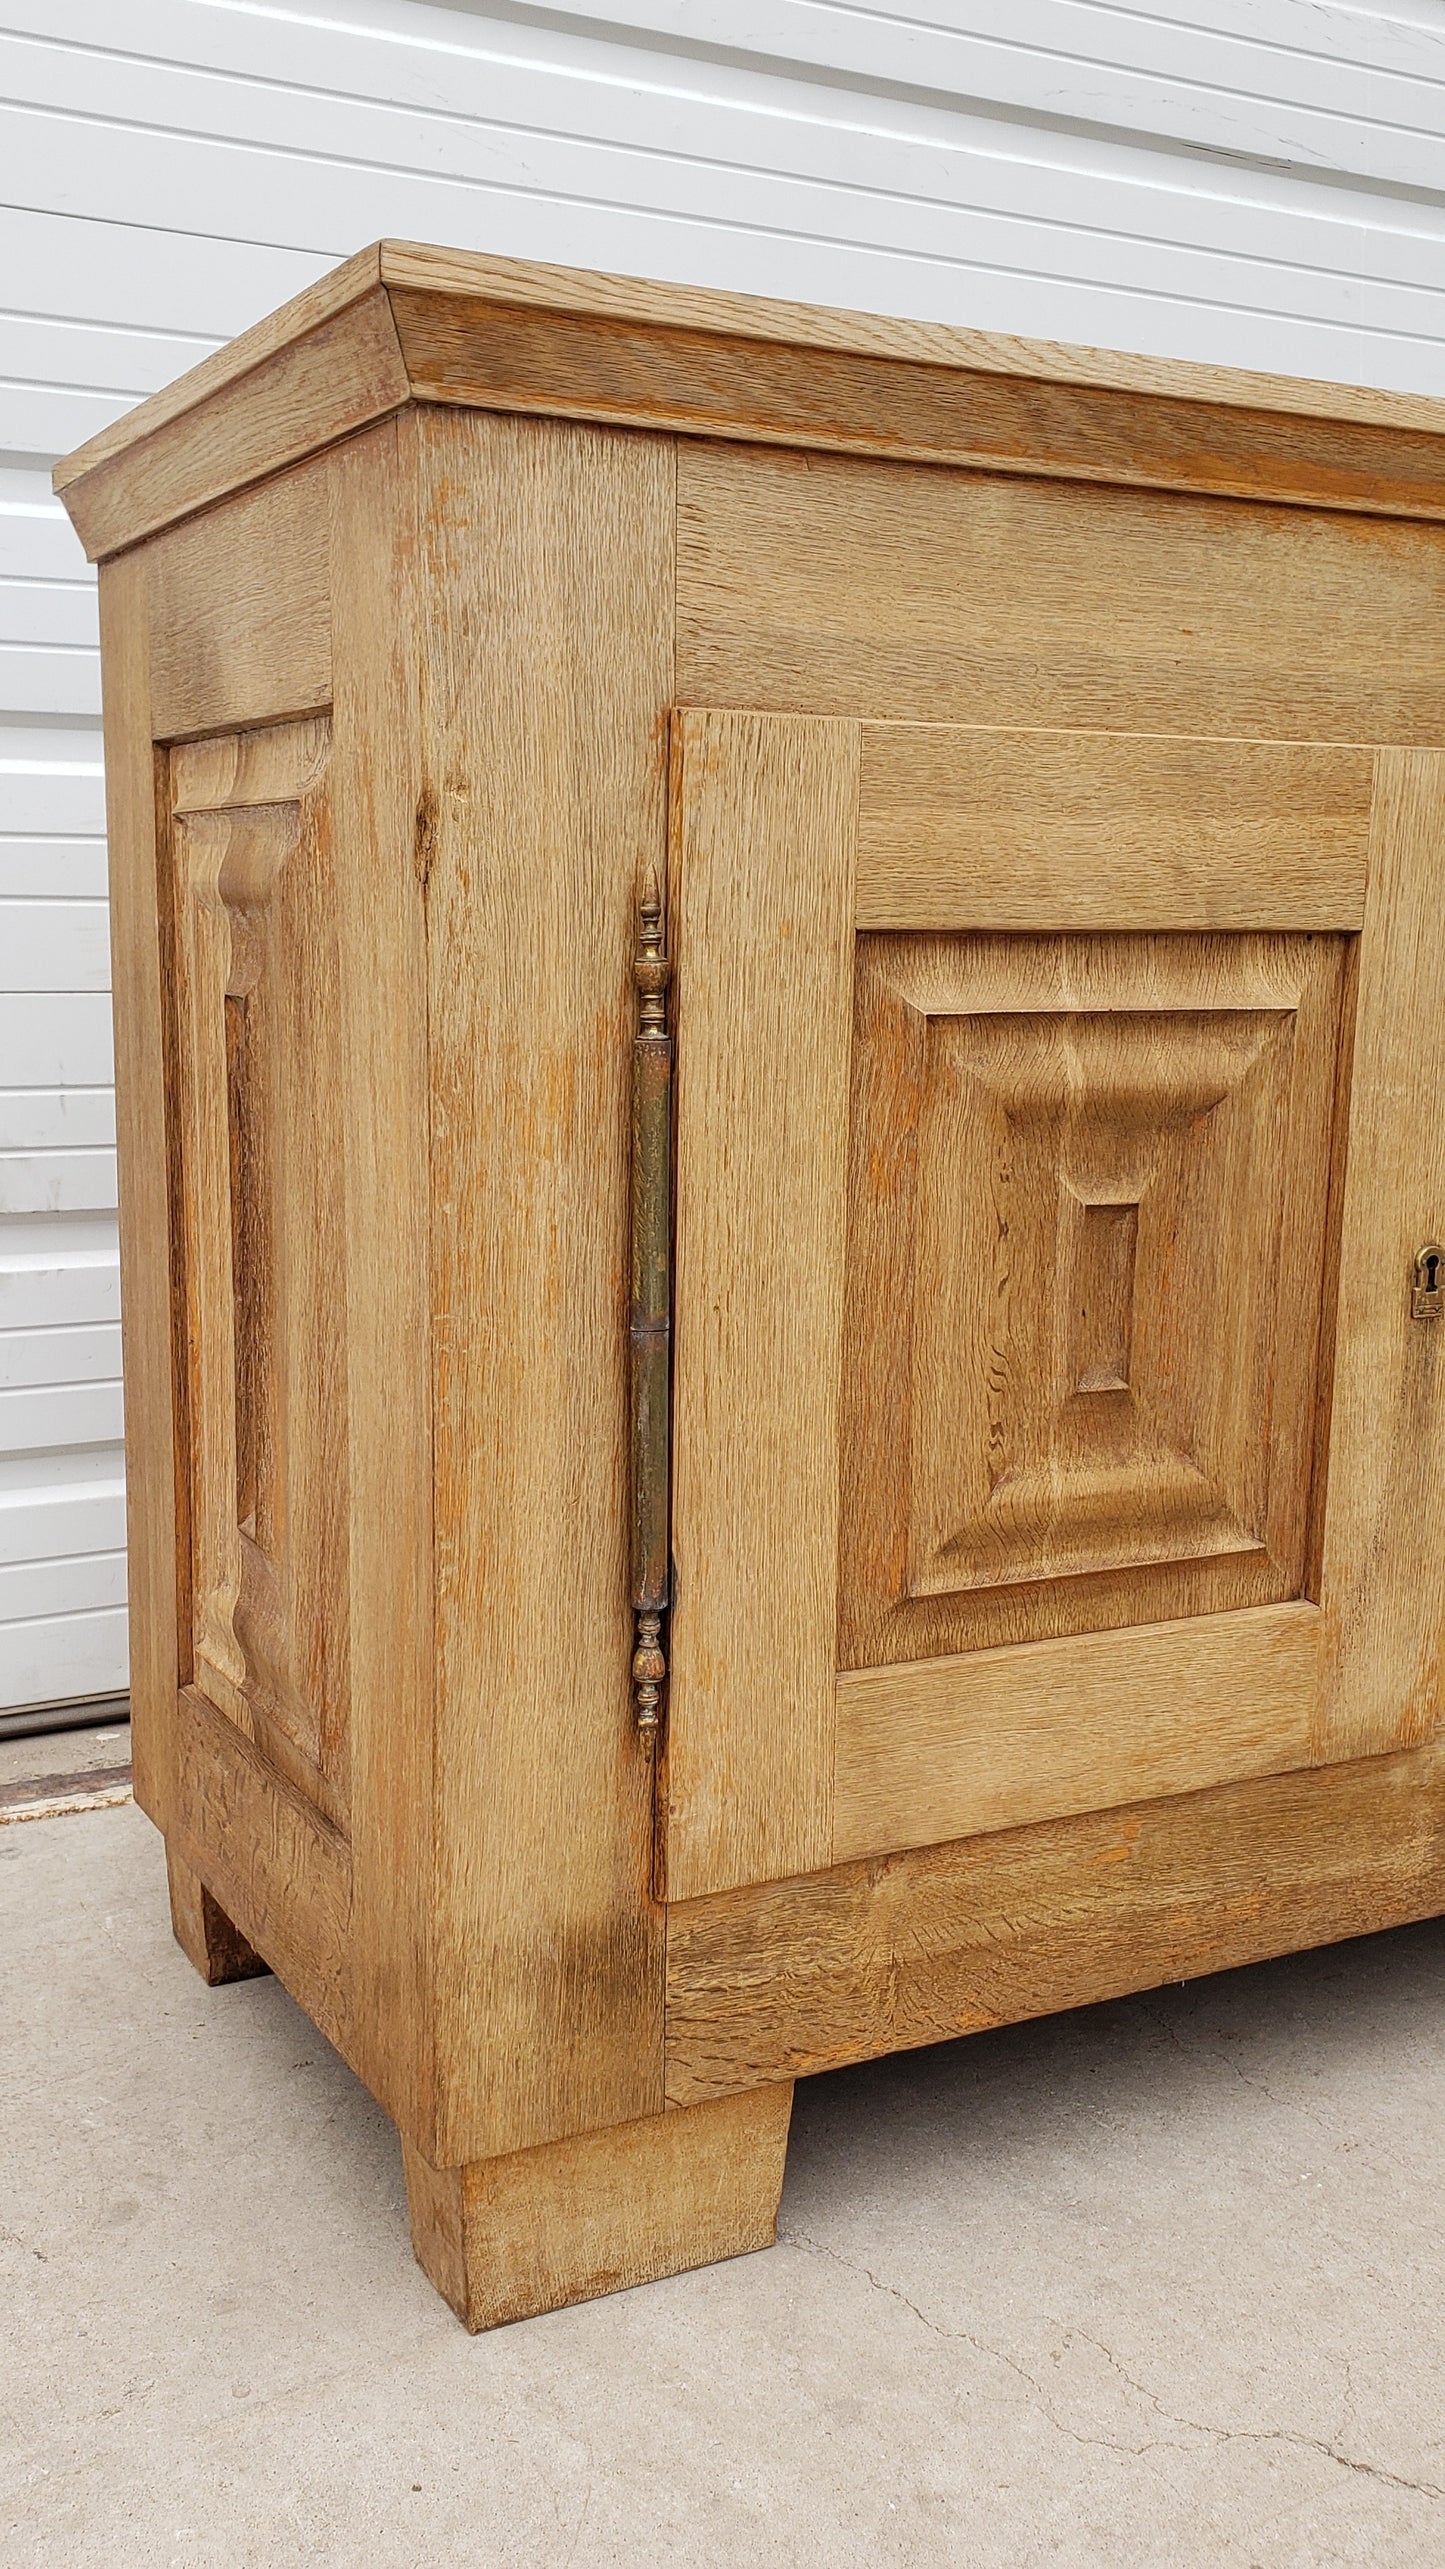 Bleached French Antique Sideboard / Console Cabinet